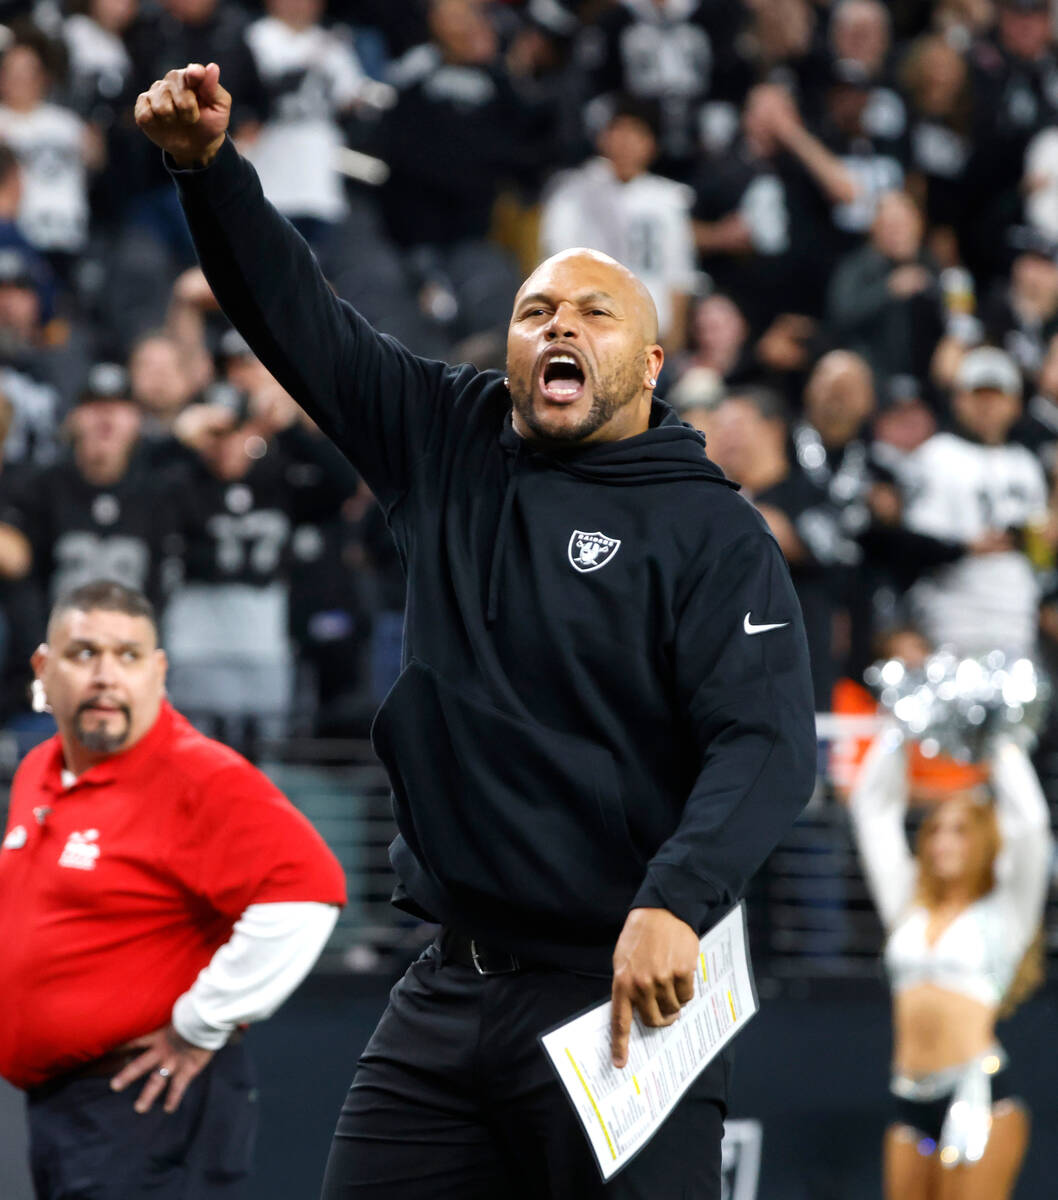 Raiders Interim Coach Antonio Pierce reacts as he leaves the field after beating the Denver Bro ...